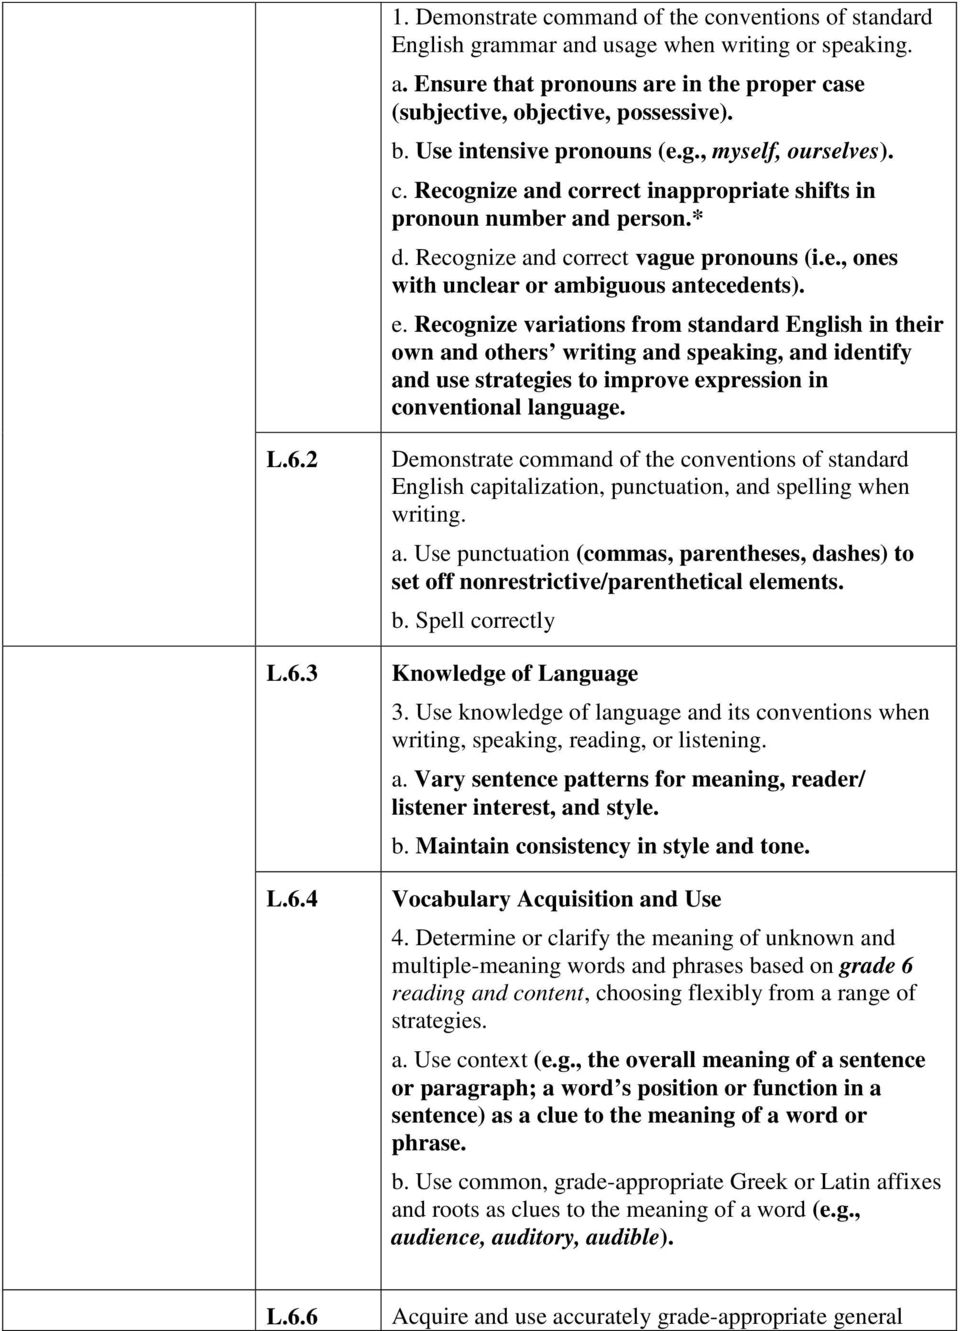 e. Recognize variations from standard English in their own and others writing and speaking, and identify and use strategies to improve expression in conventional language. L.6.